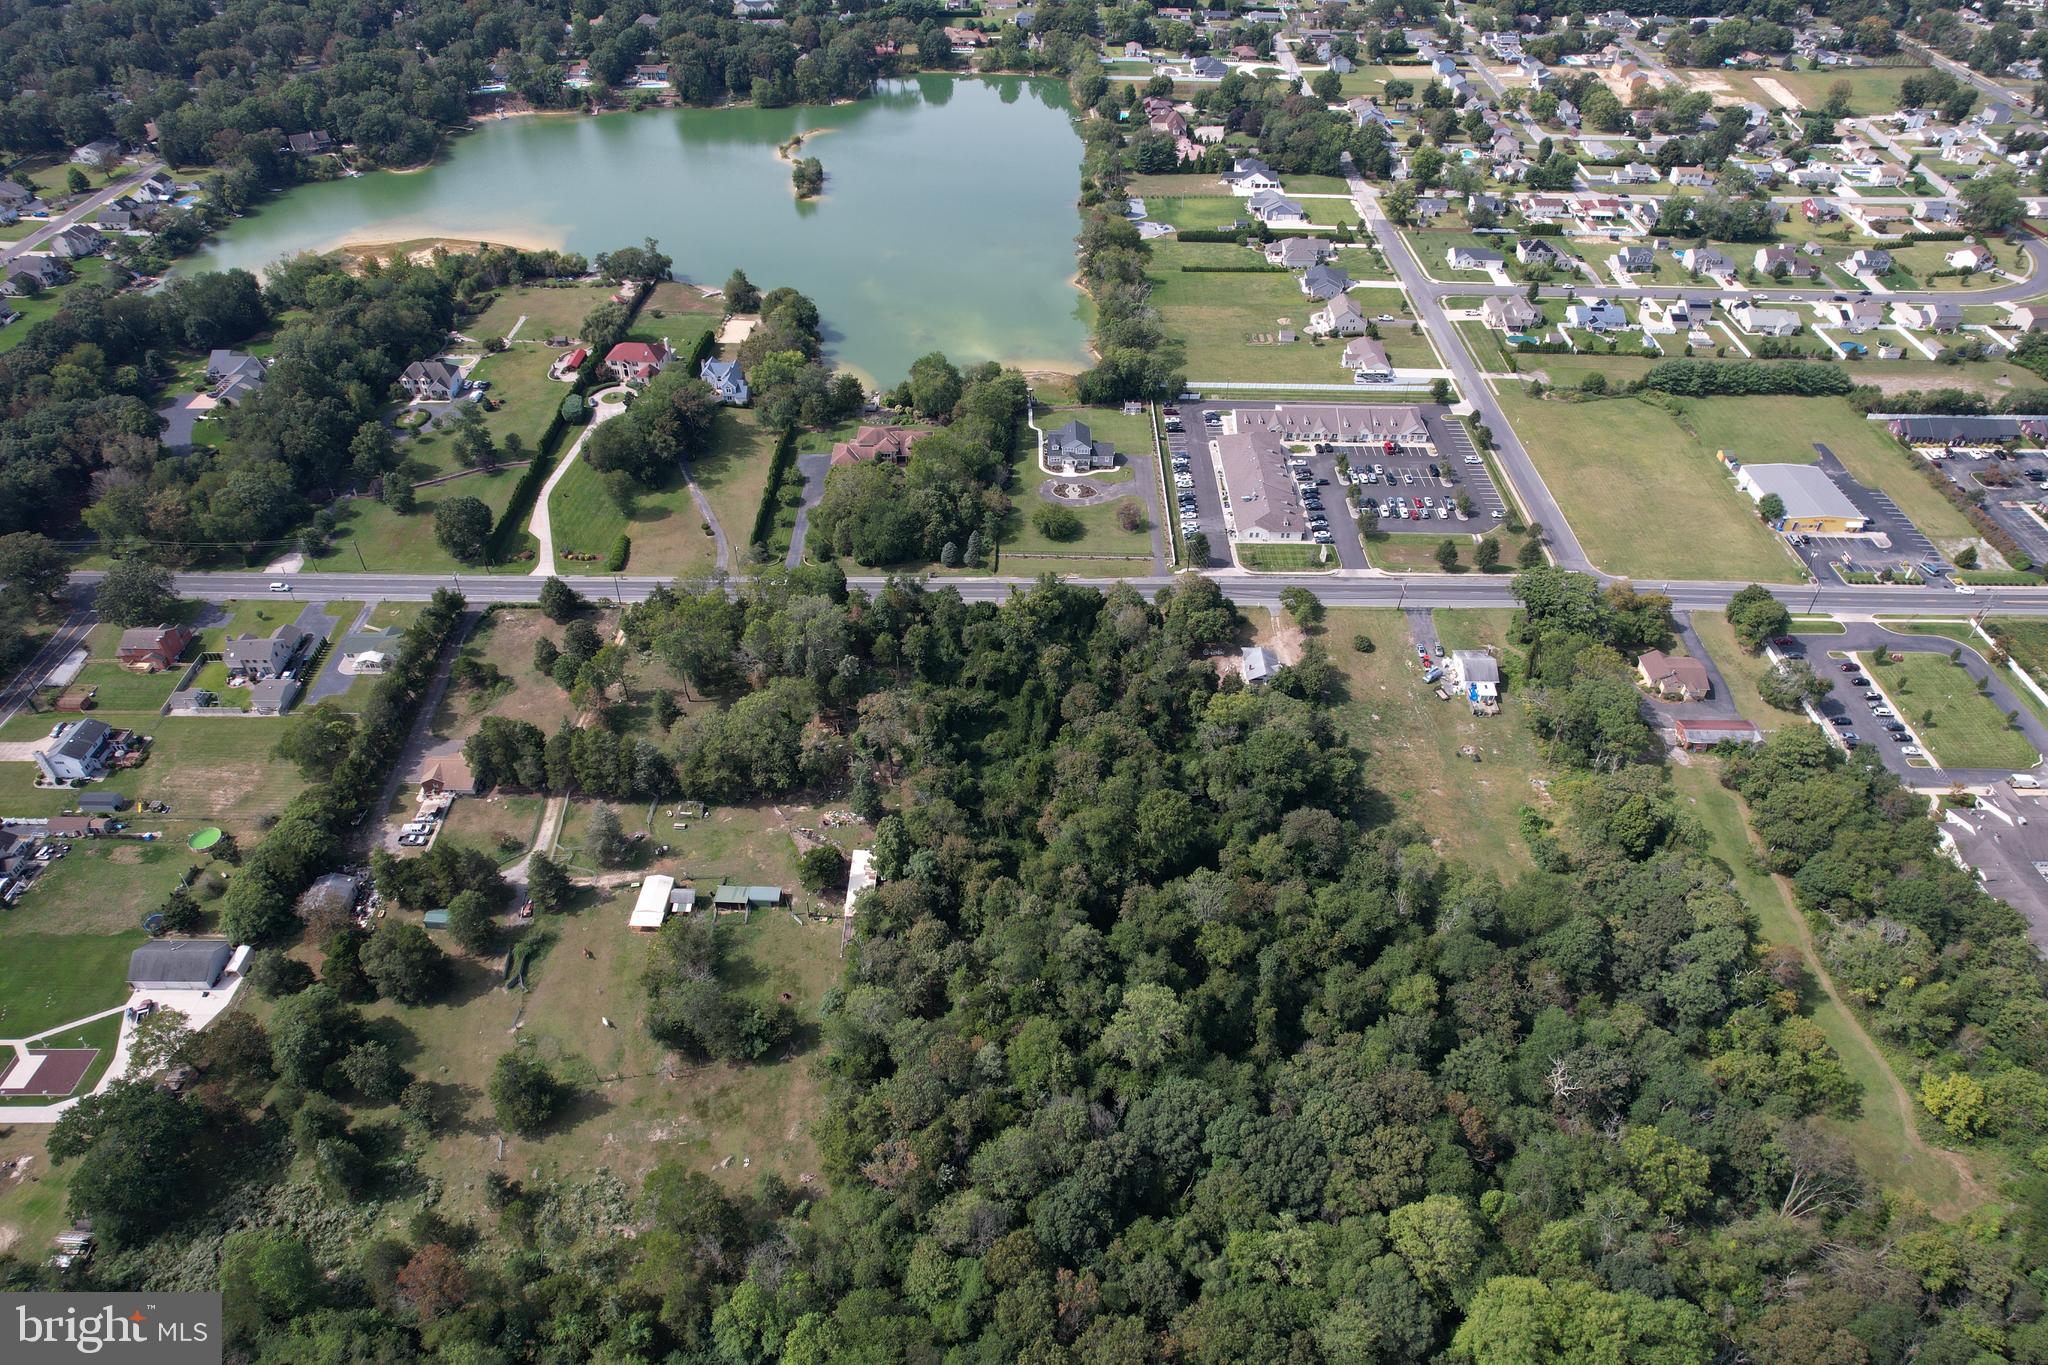 an aerial view of house with yard and lake view